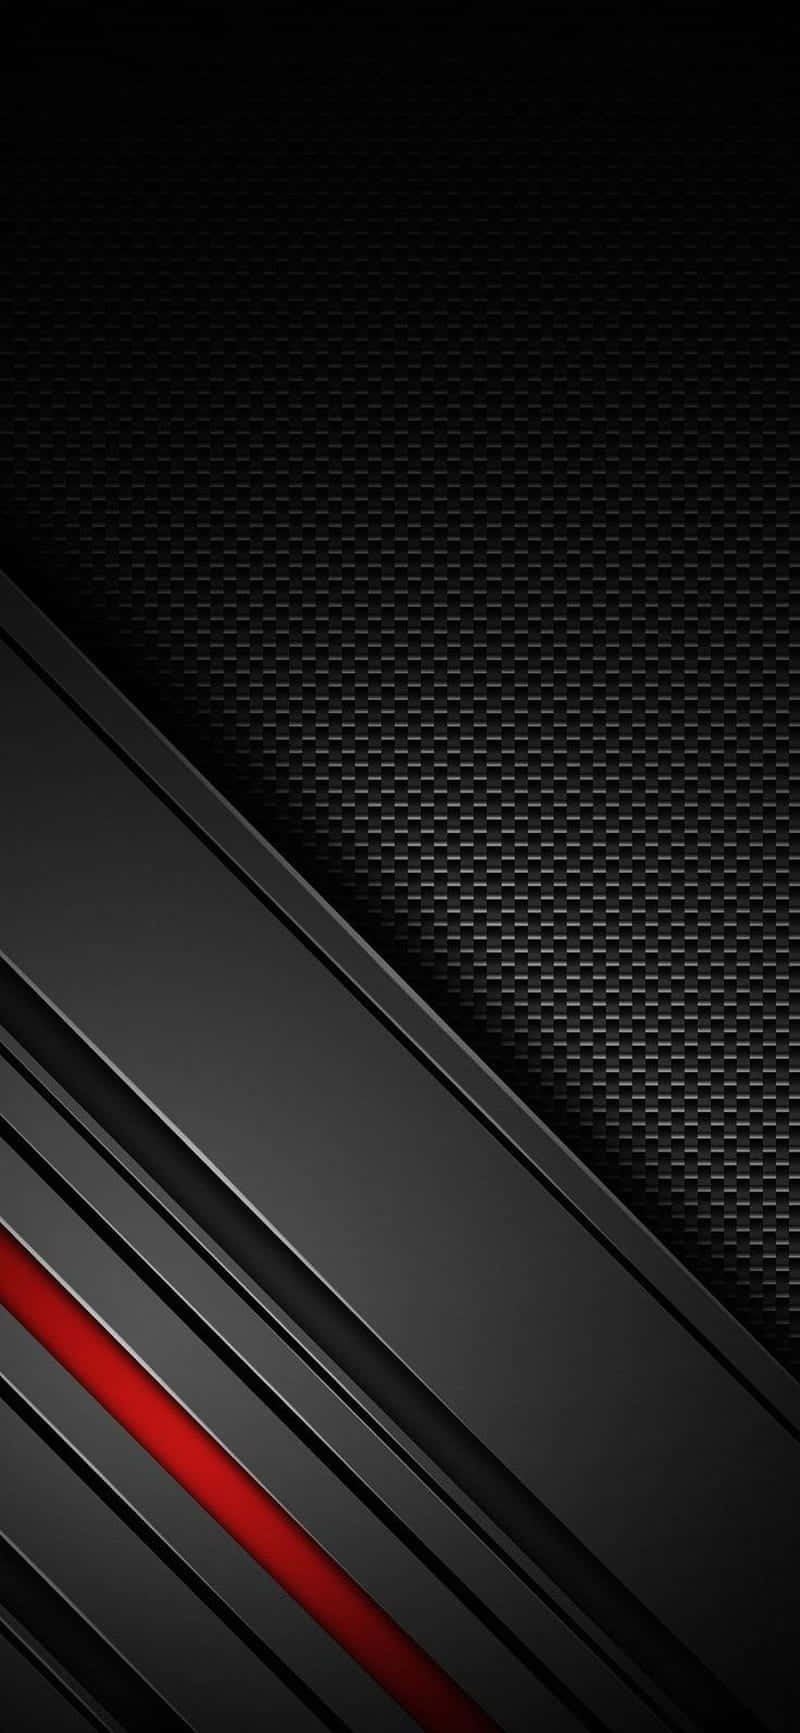 Black And Red Background With A Red Stripe Wallpaper